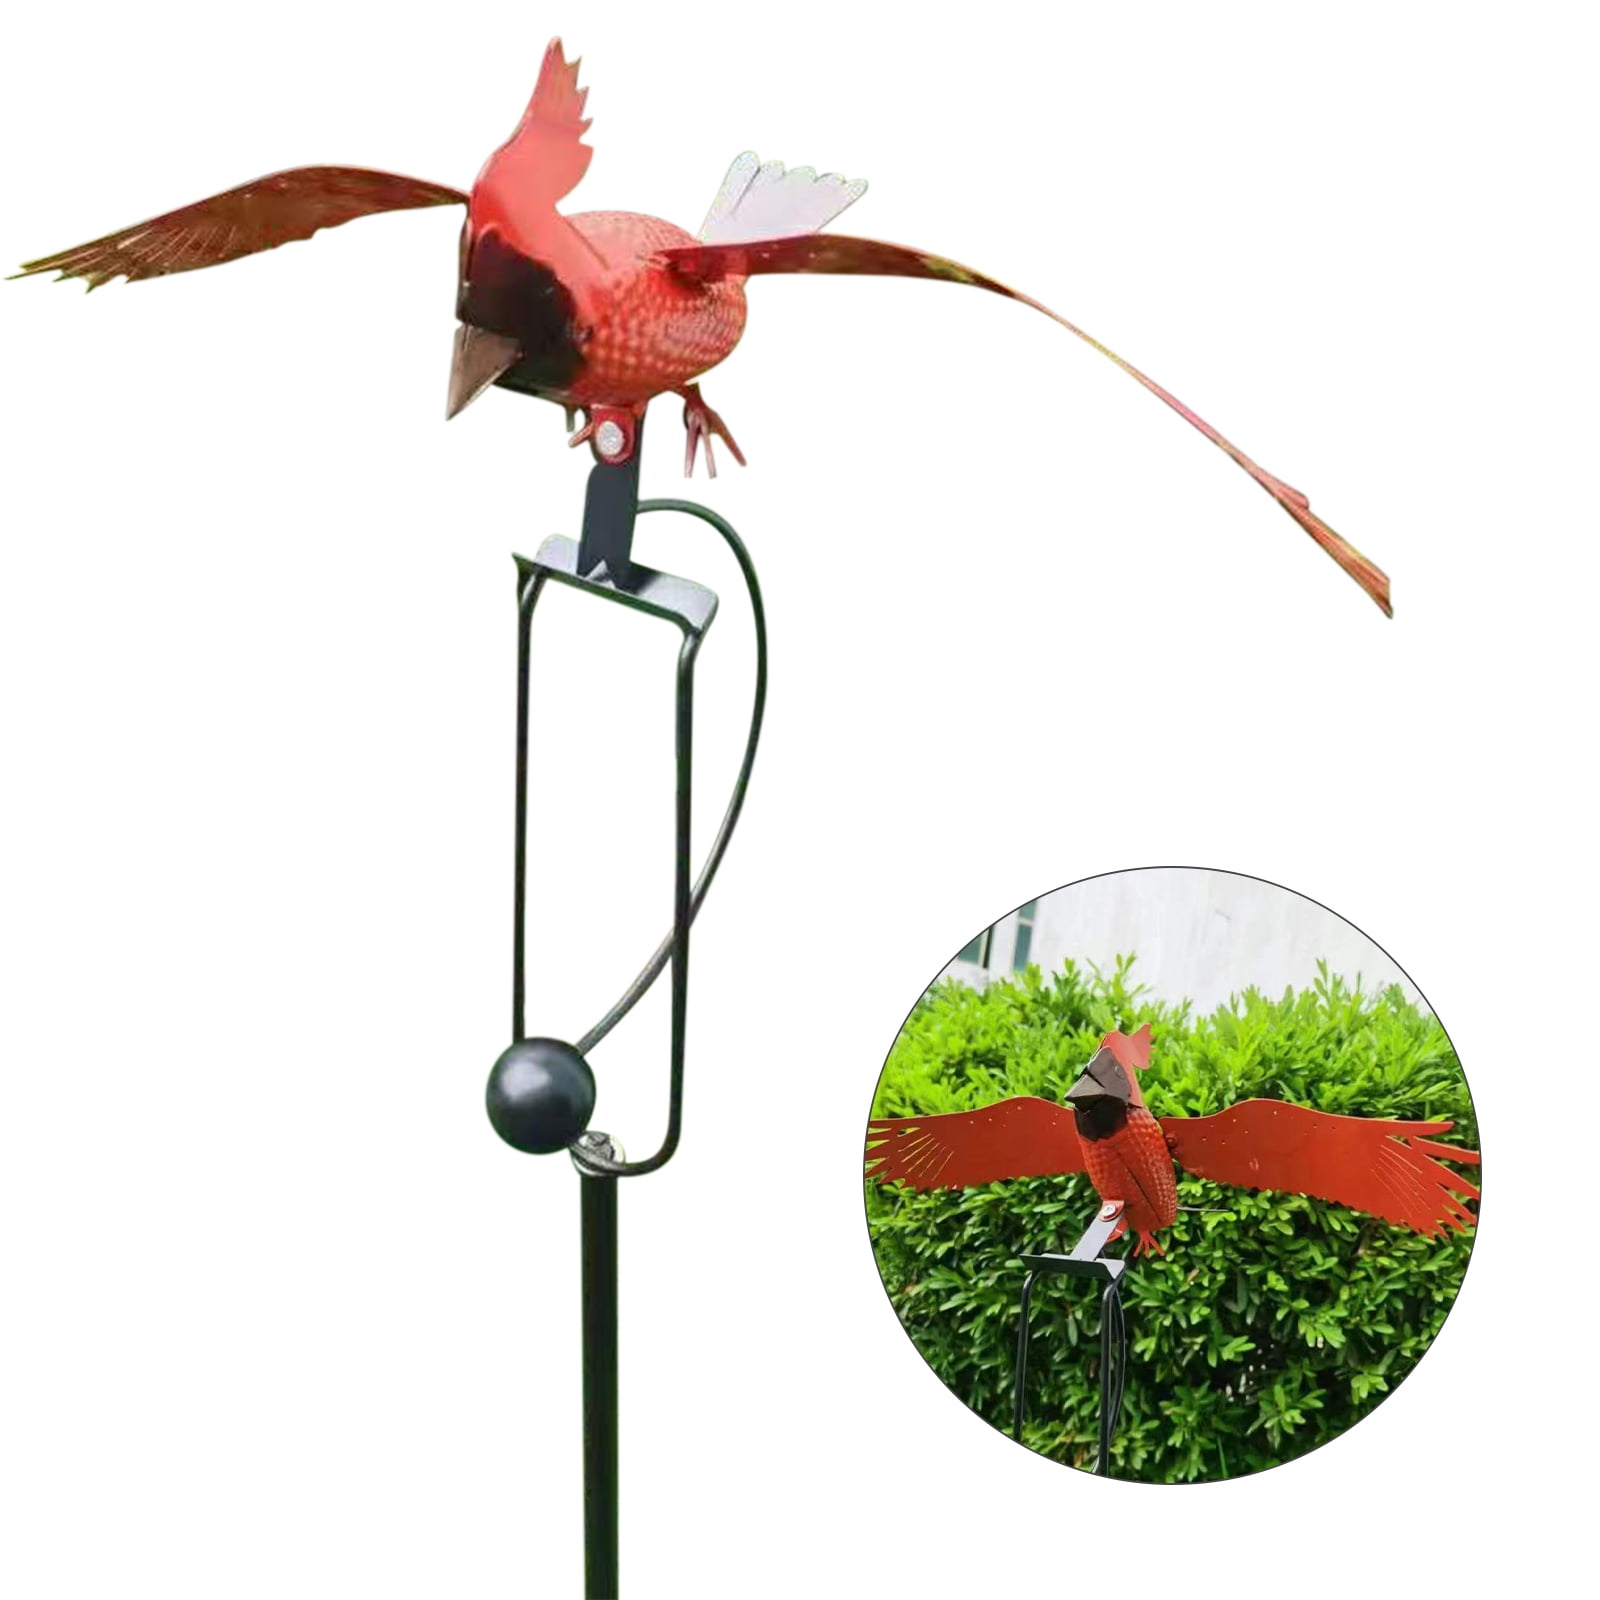 Large Decorative Wind Spinners with Hanging Hook Red Cardinal Yard and Lawn Art Decorations Homarden Metal Garden Bird Wind Spinner 6 x 6 Inch 3D Stainless Steel Outdoor Cardinal Yard Spinner 